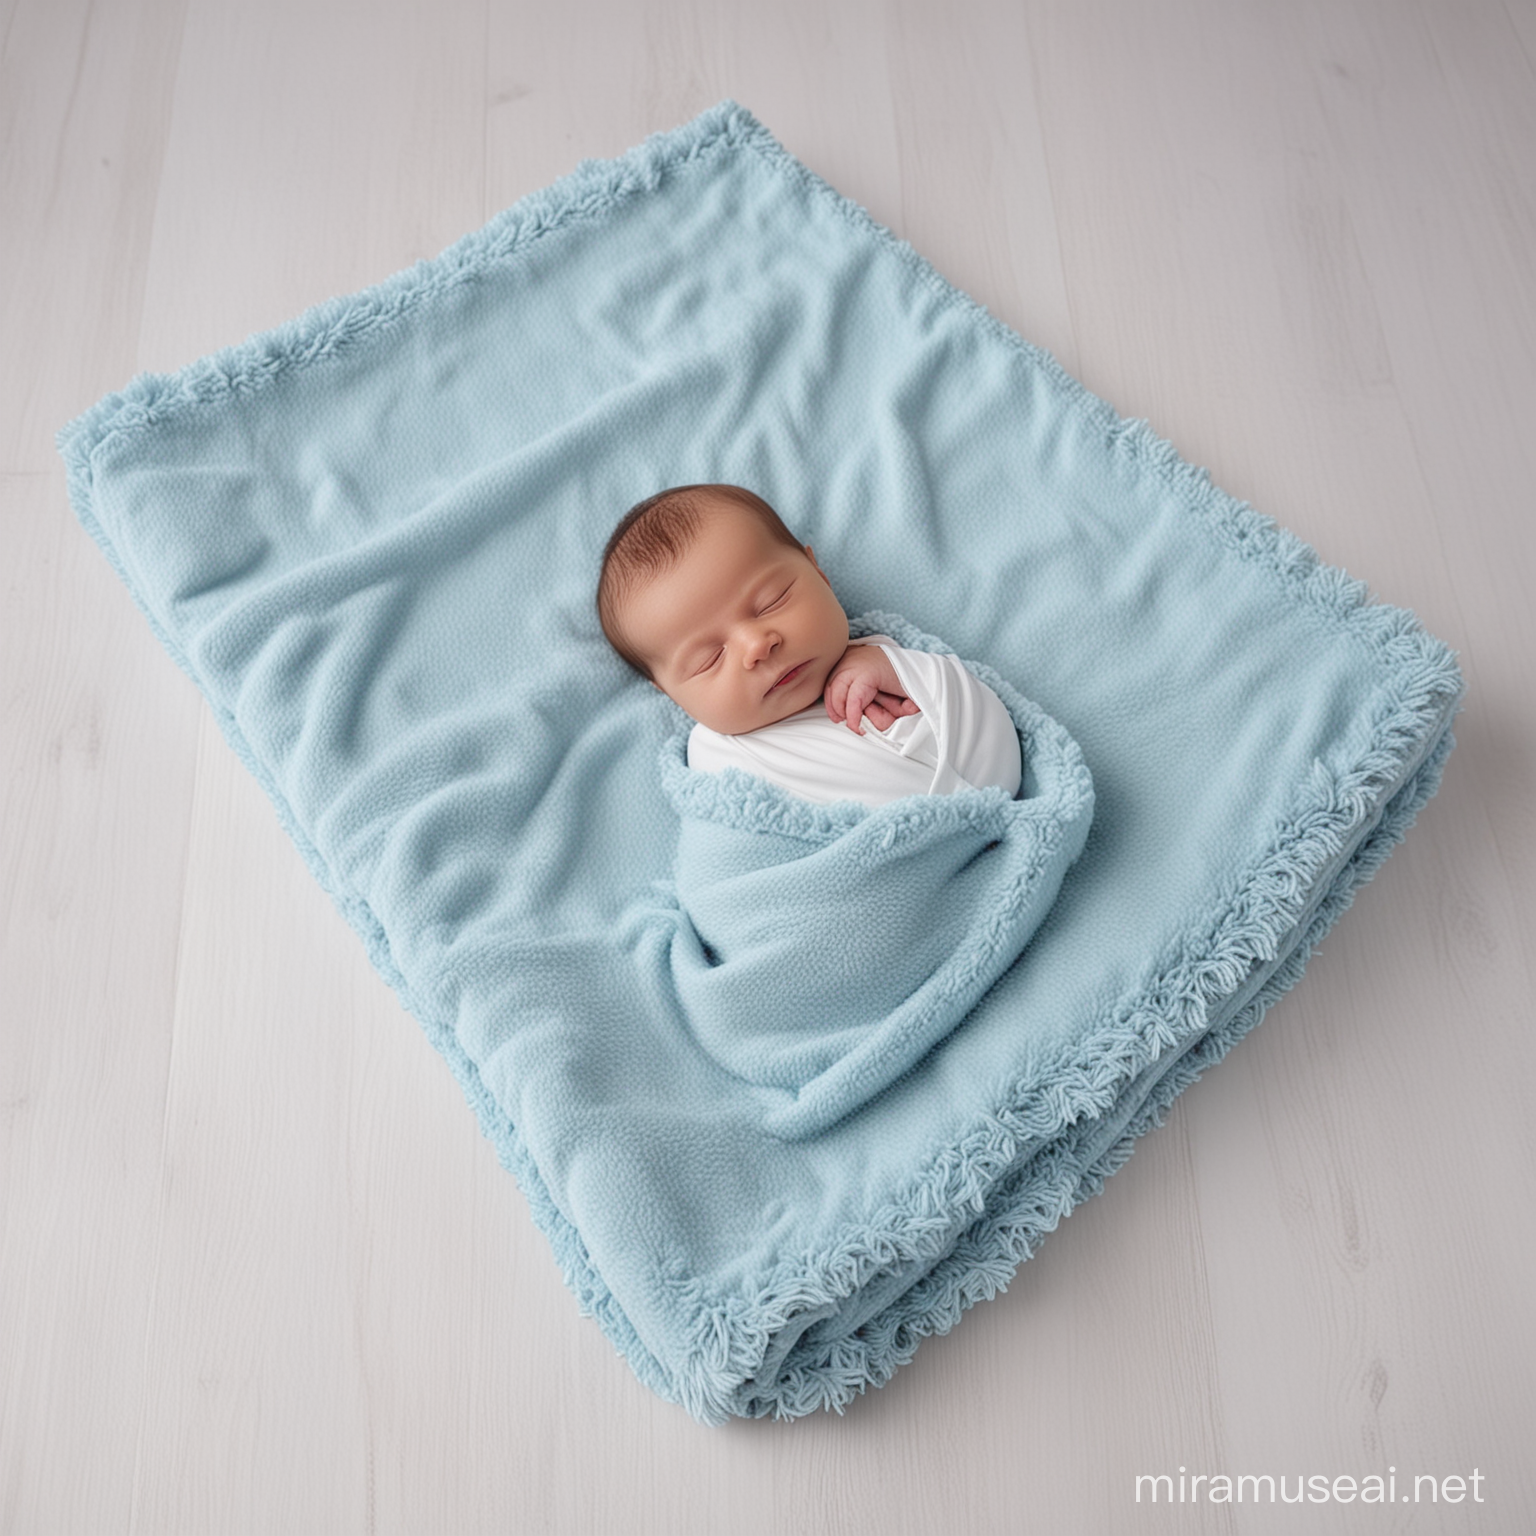 Soft Blue Newborn Blanket with Bed Side View Photography